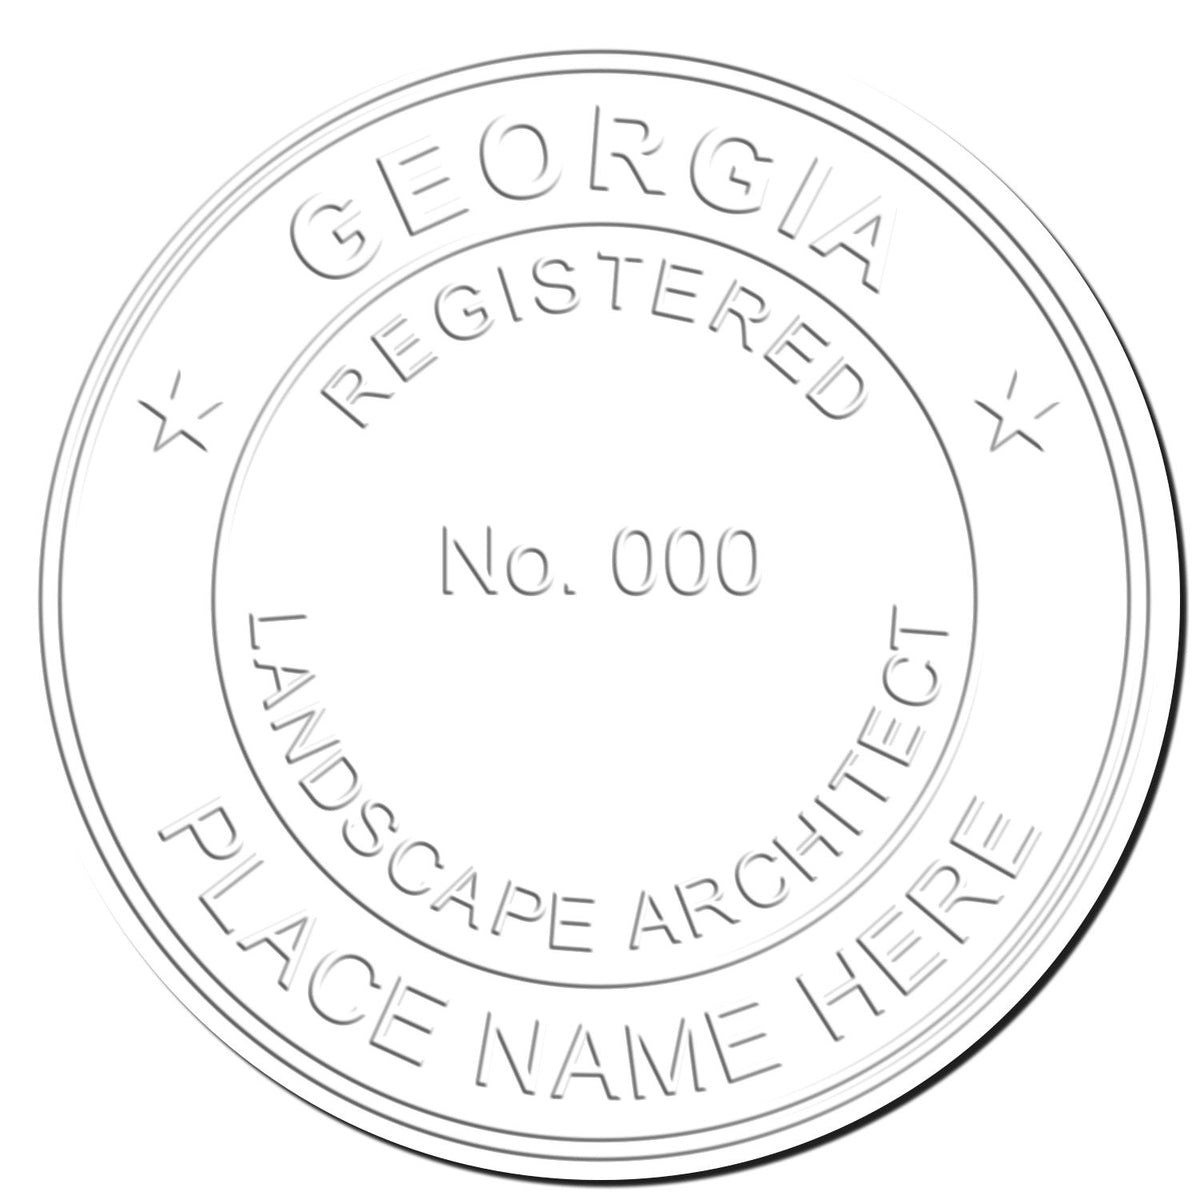 This paper is stamped with a sample imprint of the Gift Georgia Landscape Architect Seal, signifying its quality and reliability.